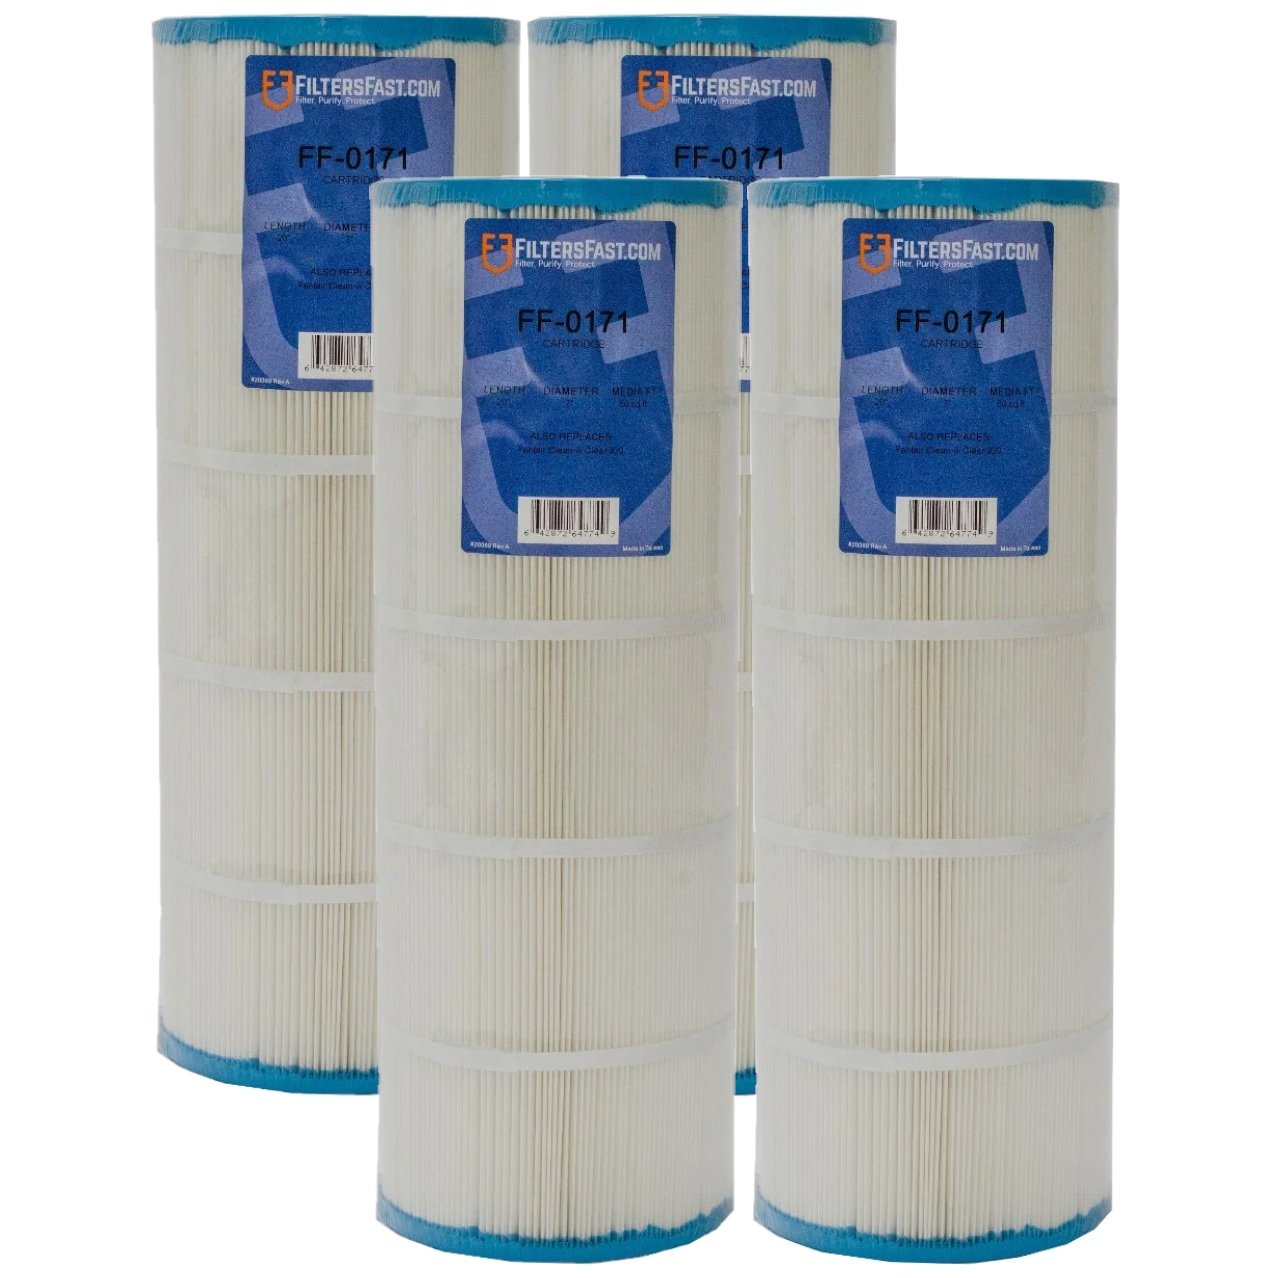 Filters Fast&reg; FF-0171 Replacement Pool & Spa Filter 4-Pack